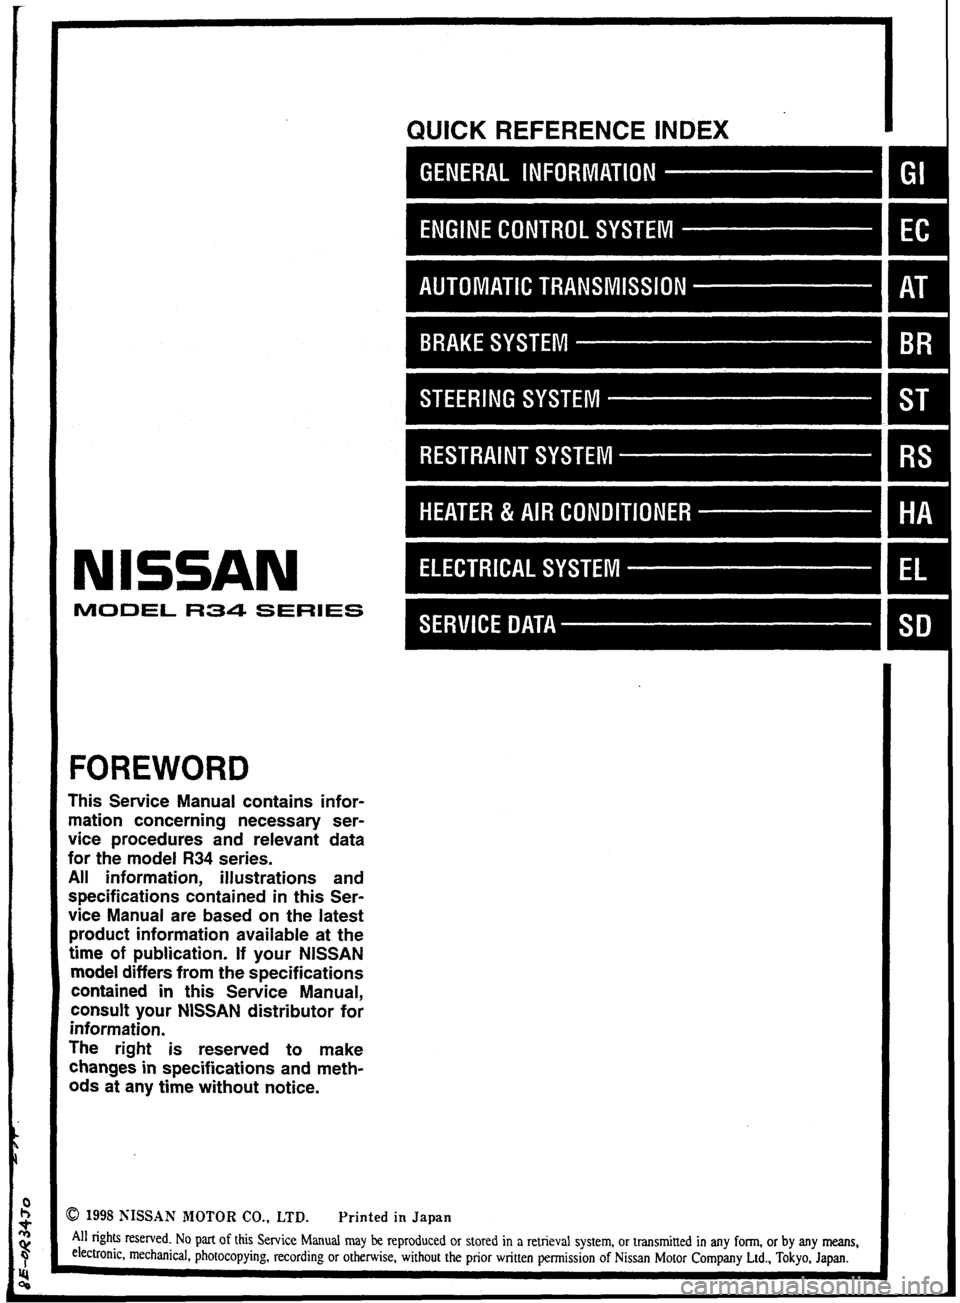 NISSAN GT-R 1998  Service Manual 
NISSAN 
MODEL R34 SERIES 
FOREWORD 
This Sewice  Manual contains  infor- 
mation  concerning  necessary ser- 
vice  procedures  and  relevant  data 
for  the model 
R34 series. 
All  information,  il